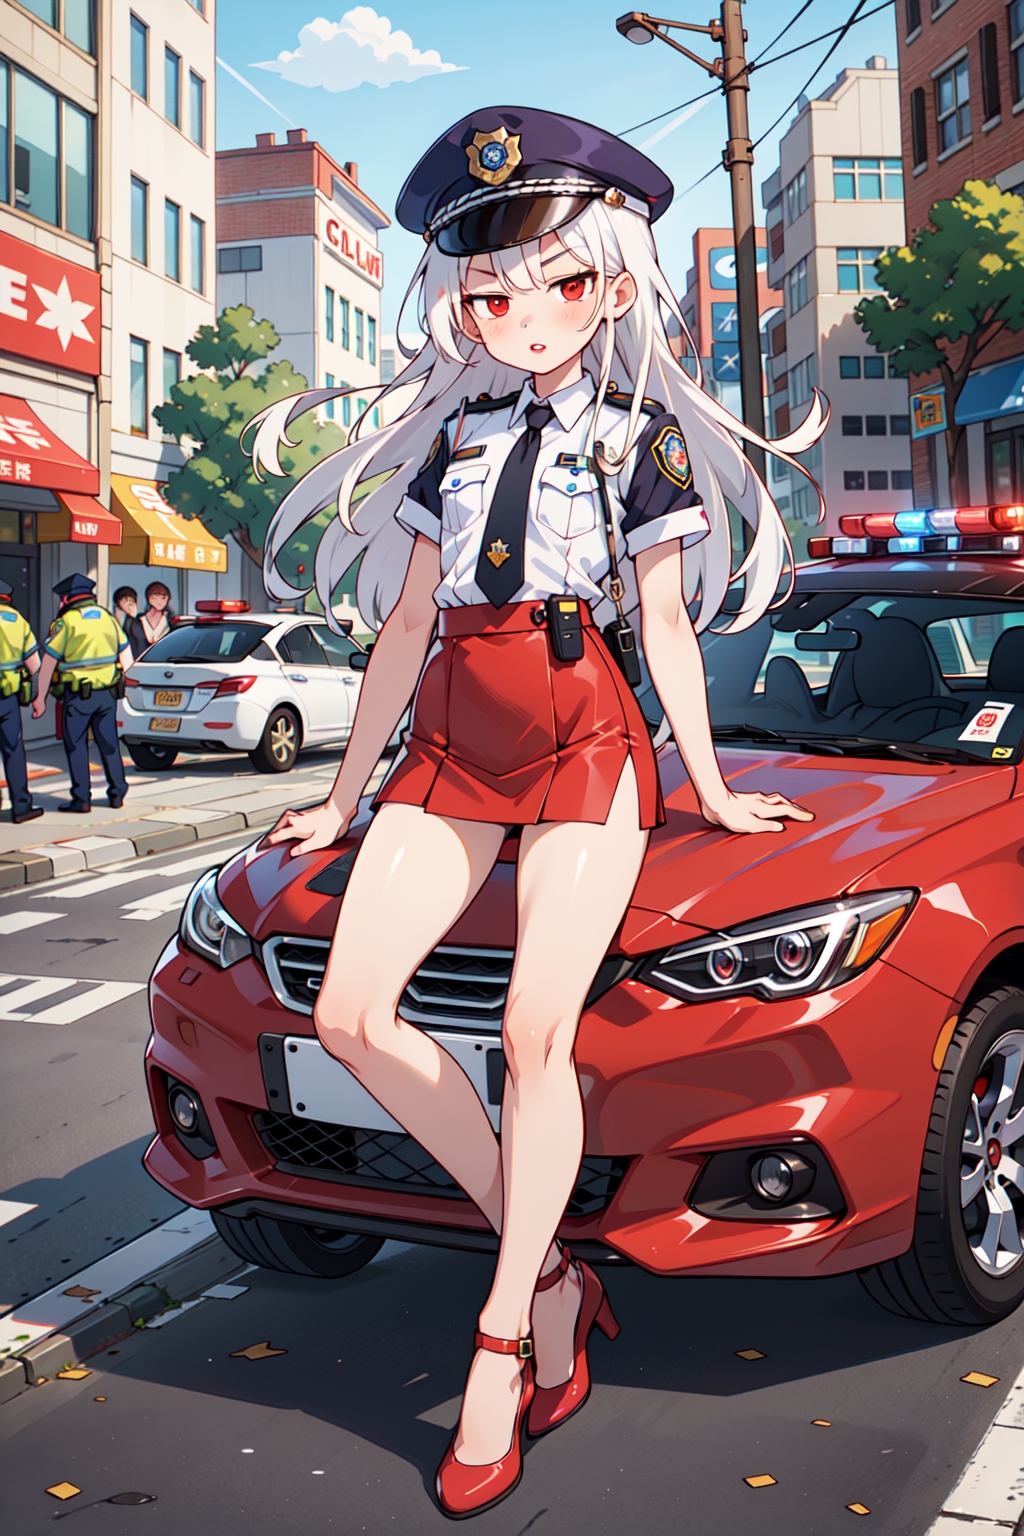 colin frawley recommends anime girl in police car pic